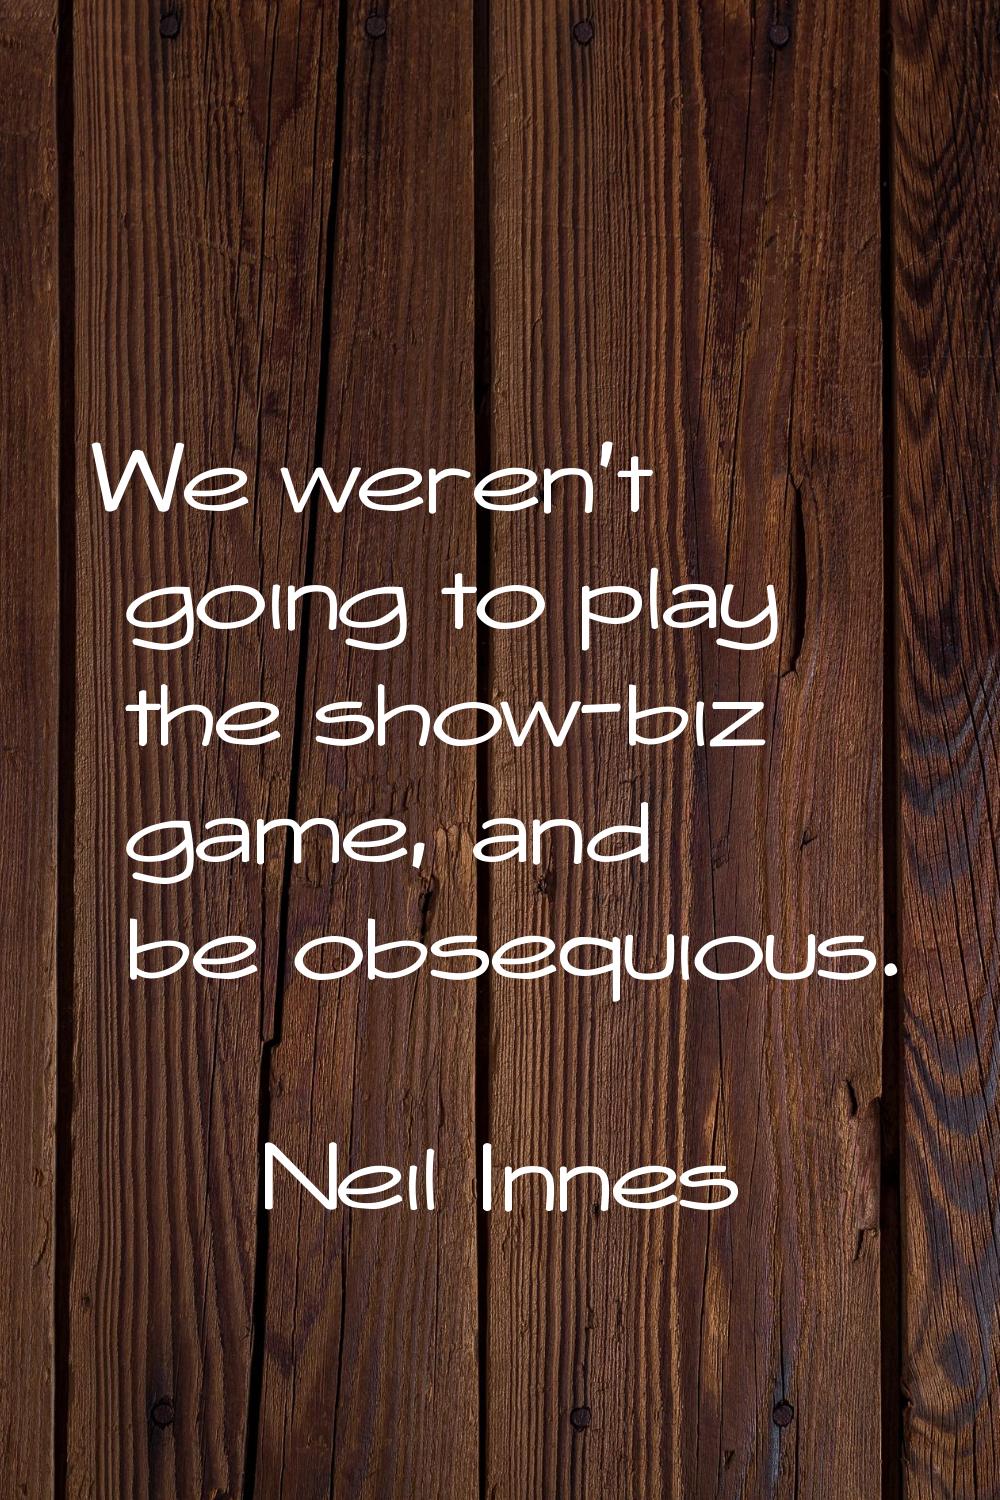 We weren't going to play the show-biz game, and be obsequious.